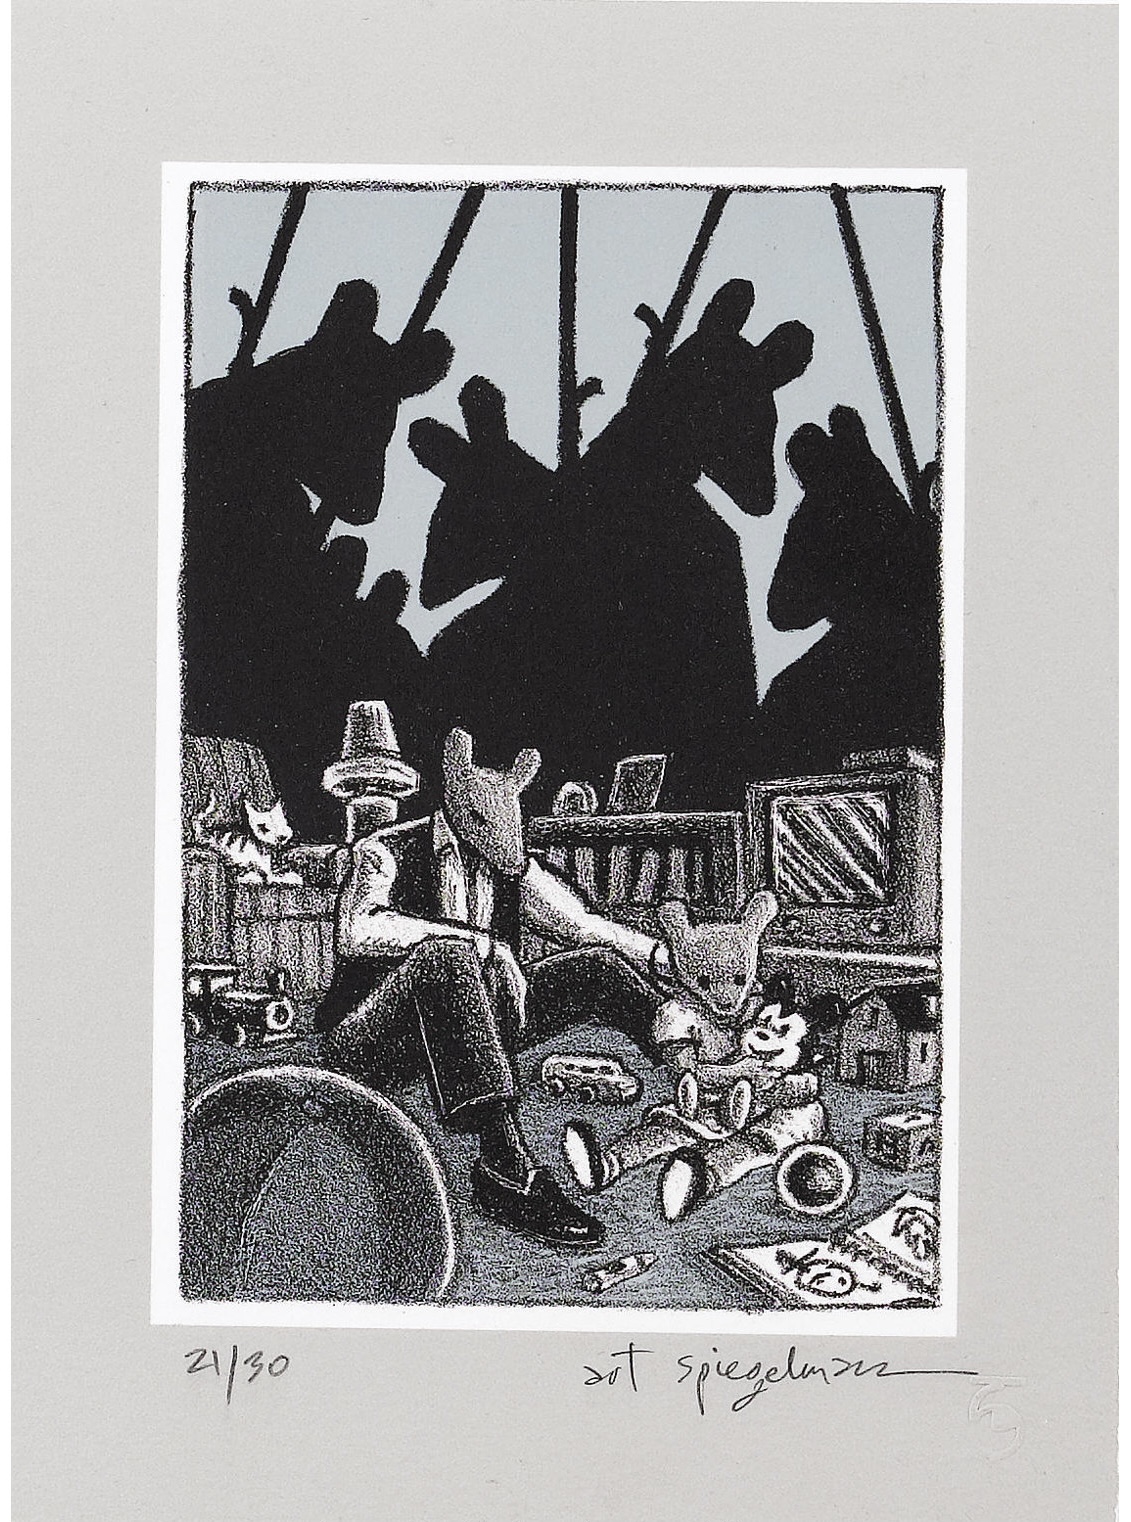 You are currently viewing Art Spiegelman – “Maus” Limited Edition Print. (2006)